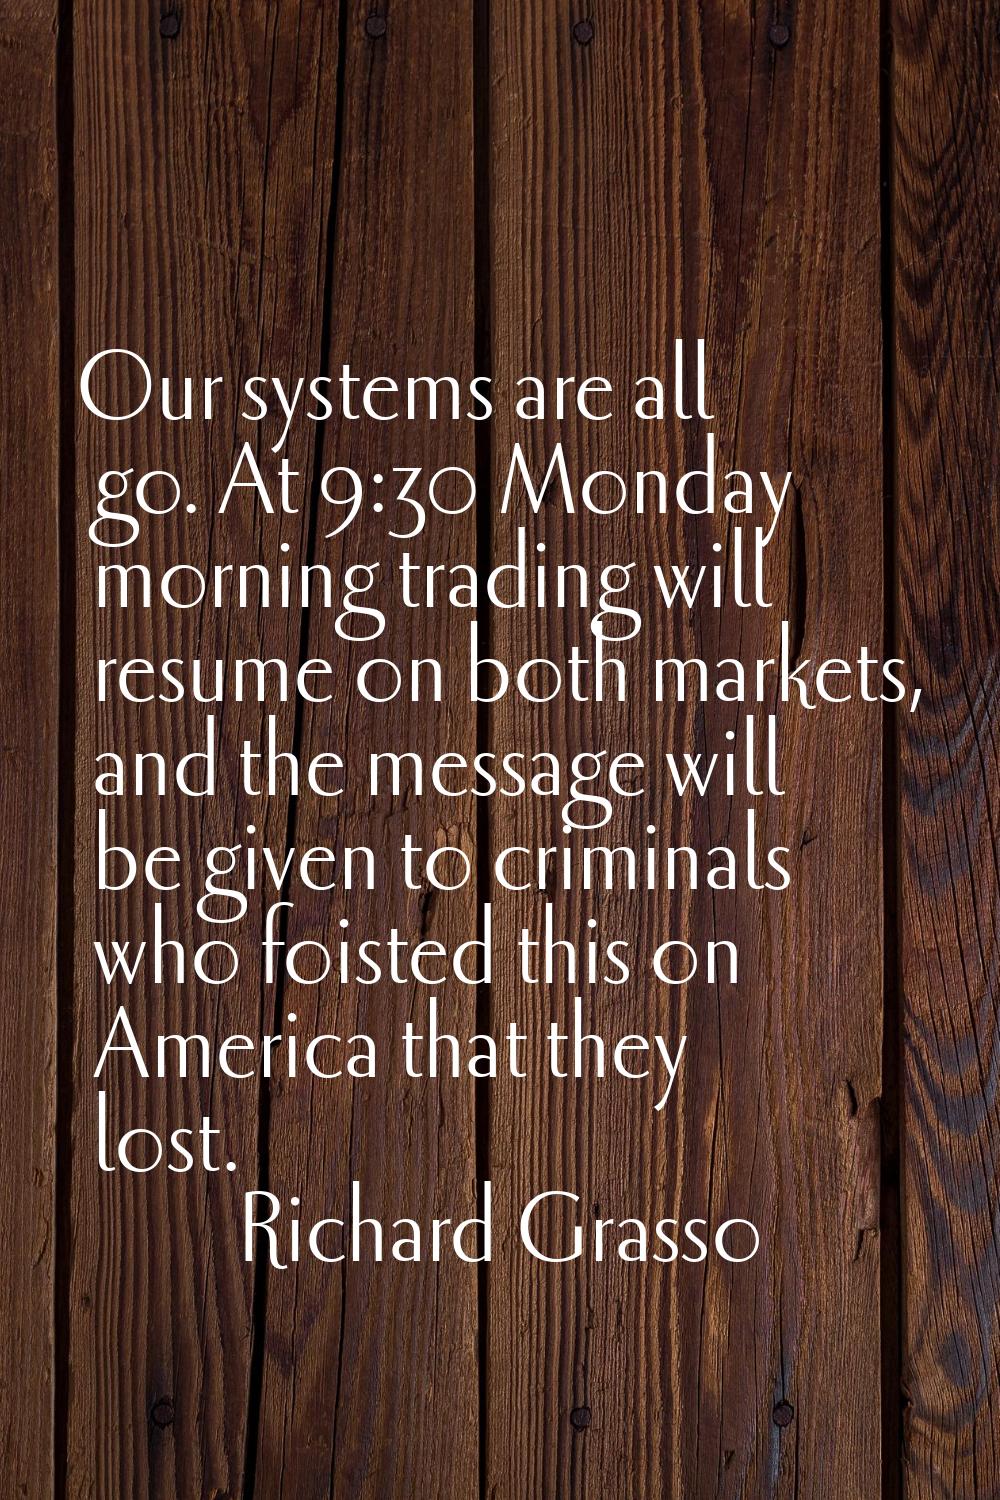 Our systems are all go. At 9:30 Monday morning trading will resume on both markets, and the message